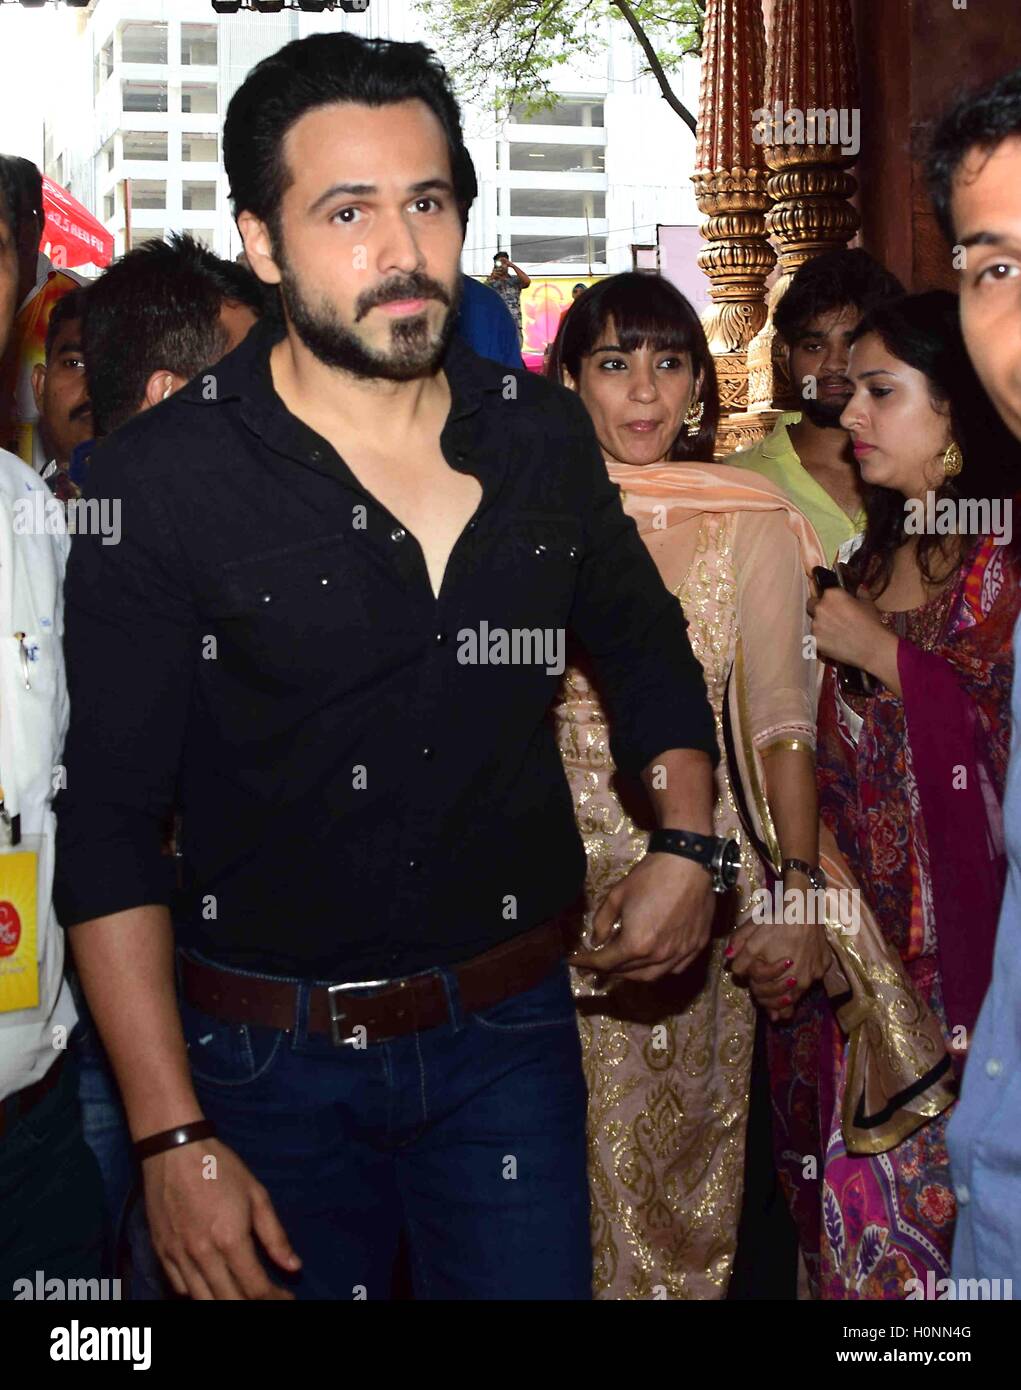 Bollywood Actor Emraan Hashmi Wife Parveen Shahani Visit Ganesh Galli Stock Photo Alamy They were spotted in bandra. https www alamy com stock photo bollywood actor emraan hashmi wife parveen shahani visit ganesh galli 120950160 html